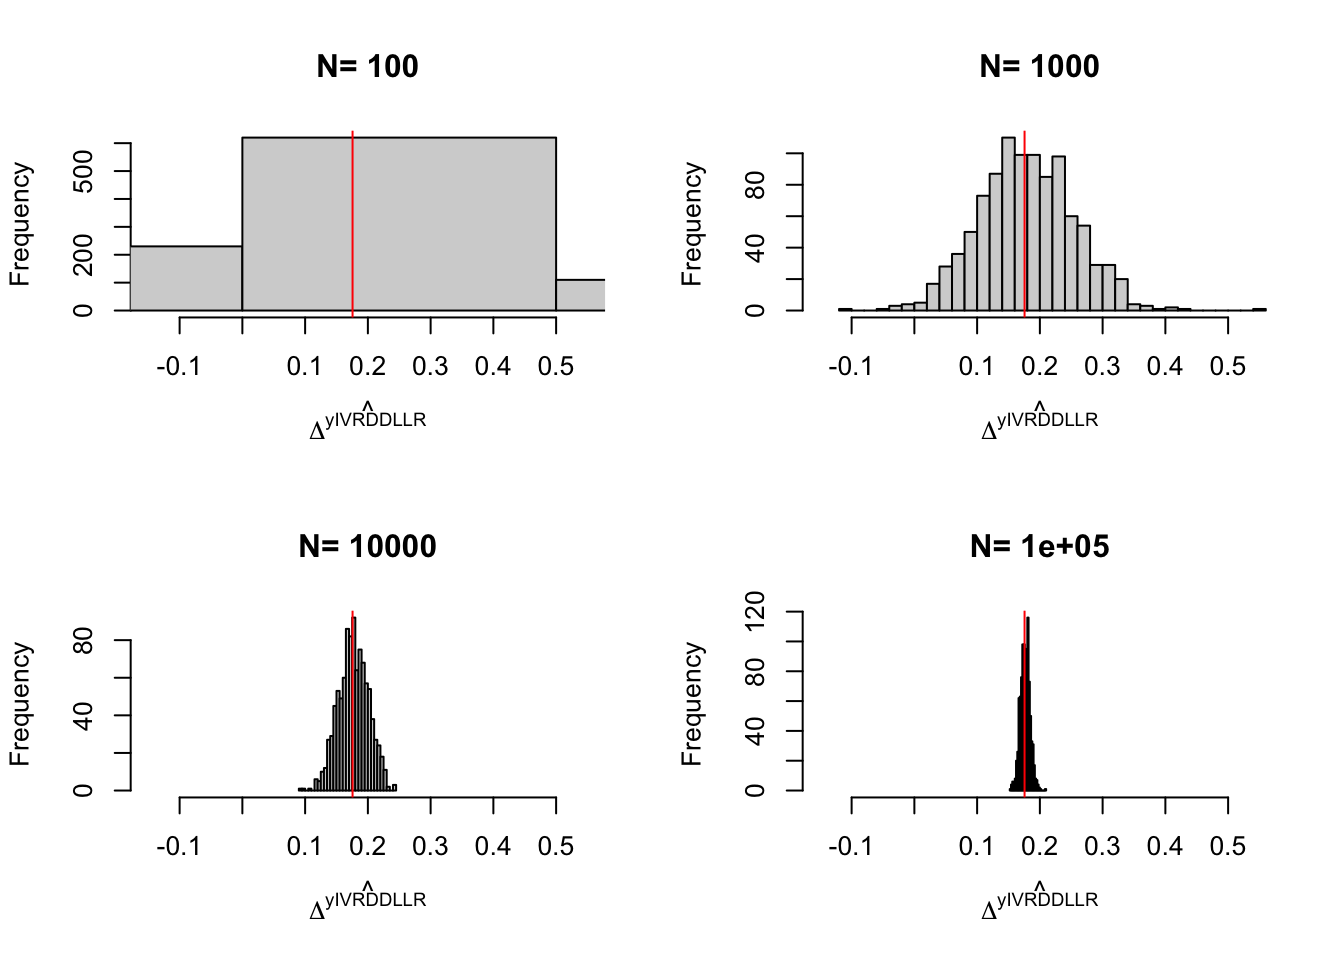 Distribution of the $IV RDD LLR$ estimator over replications of samples of different sizes